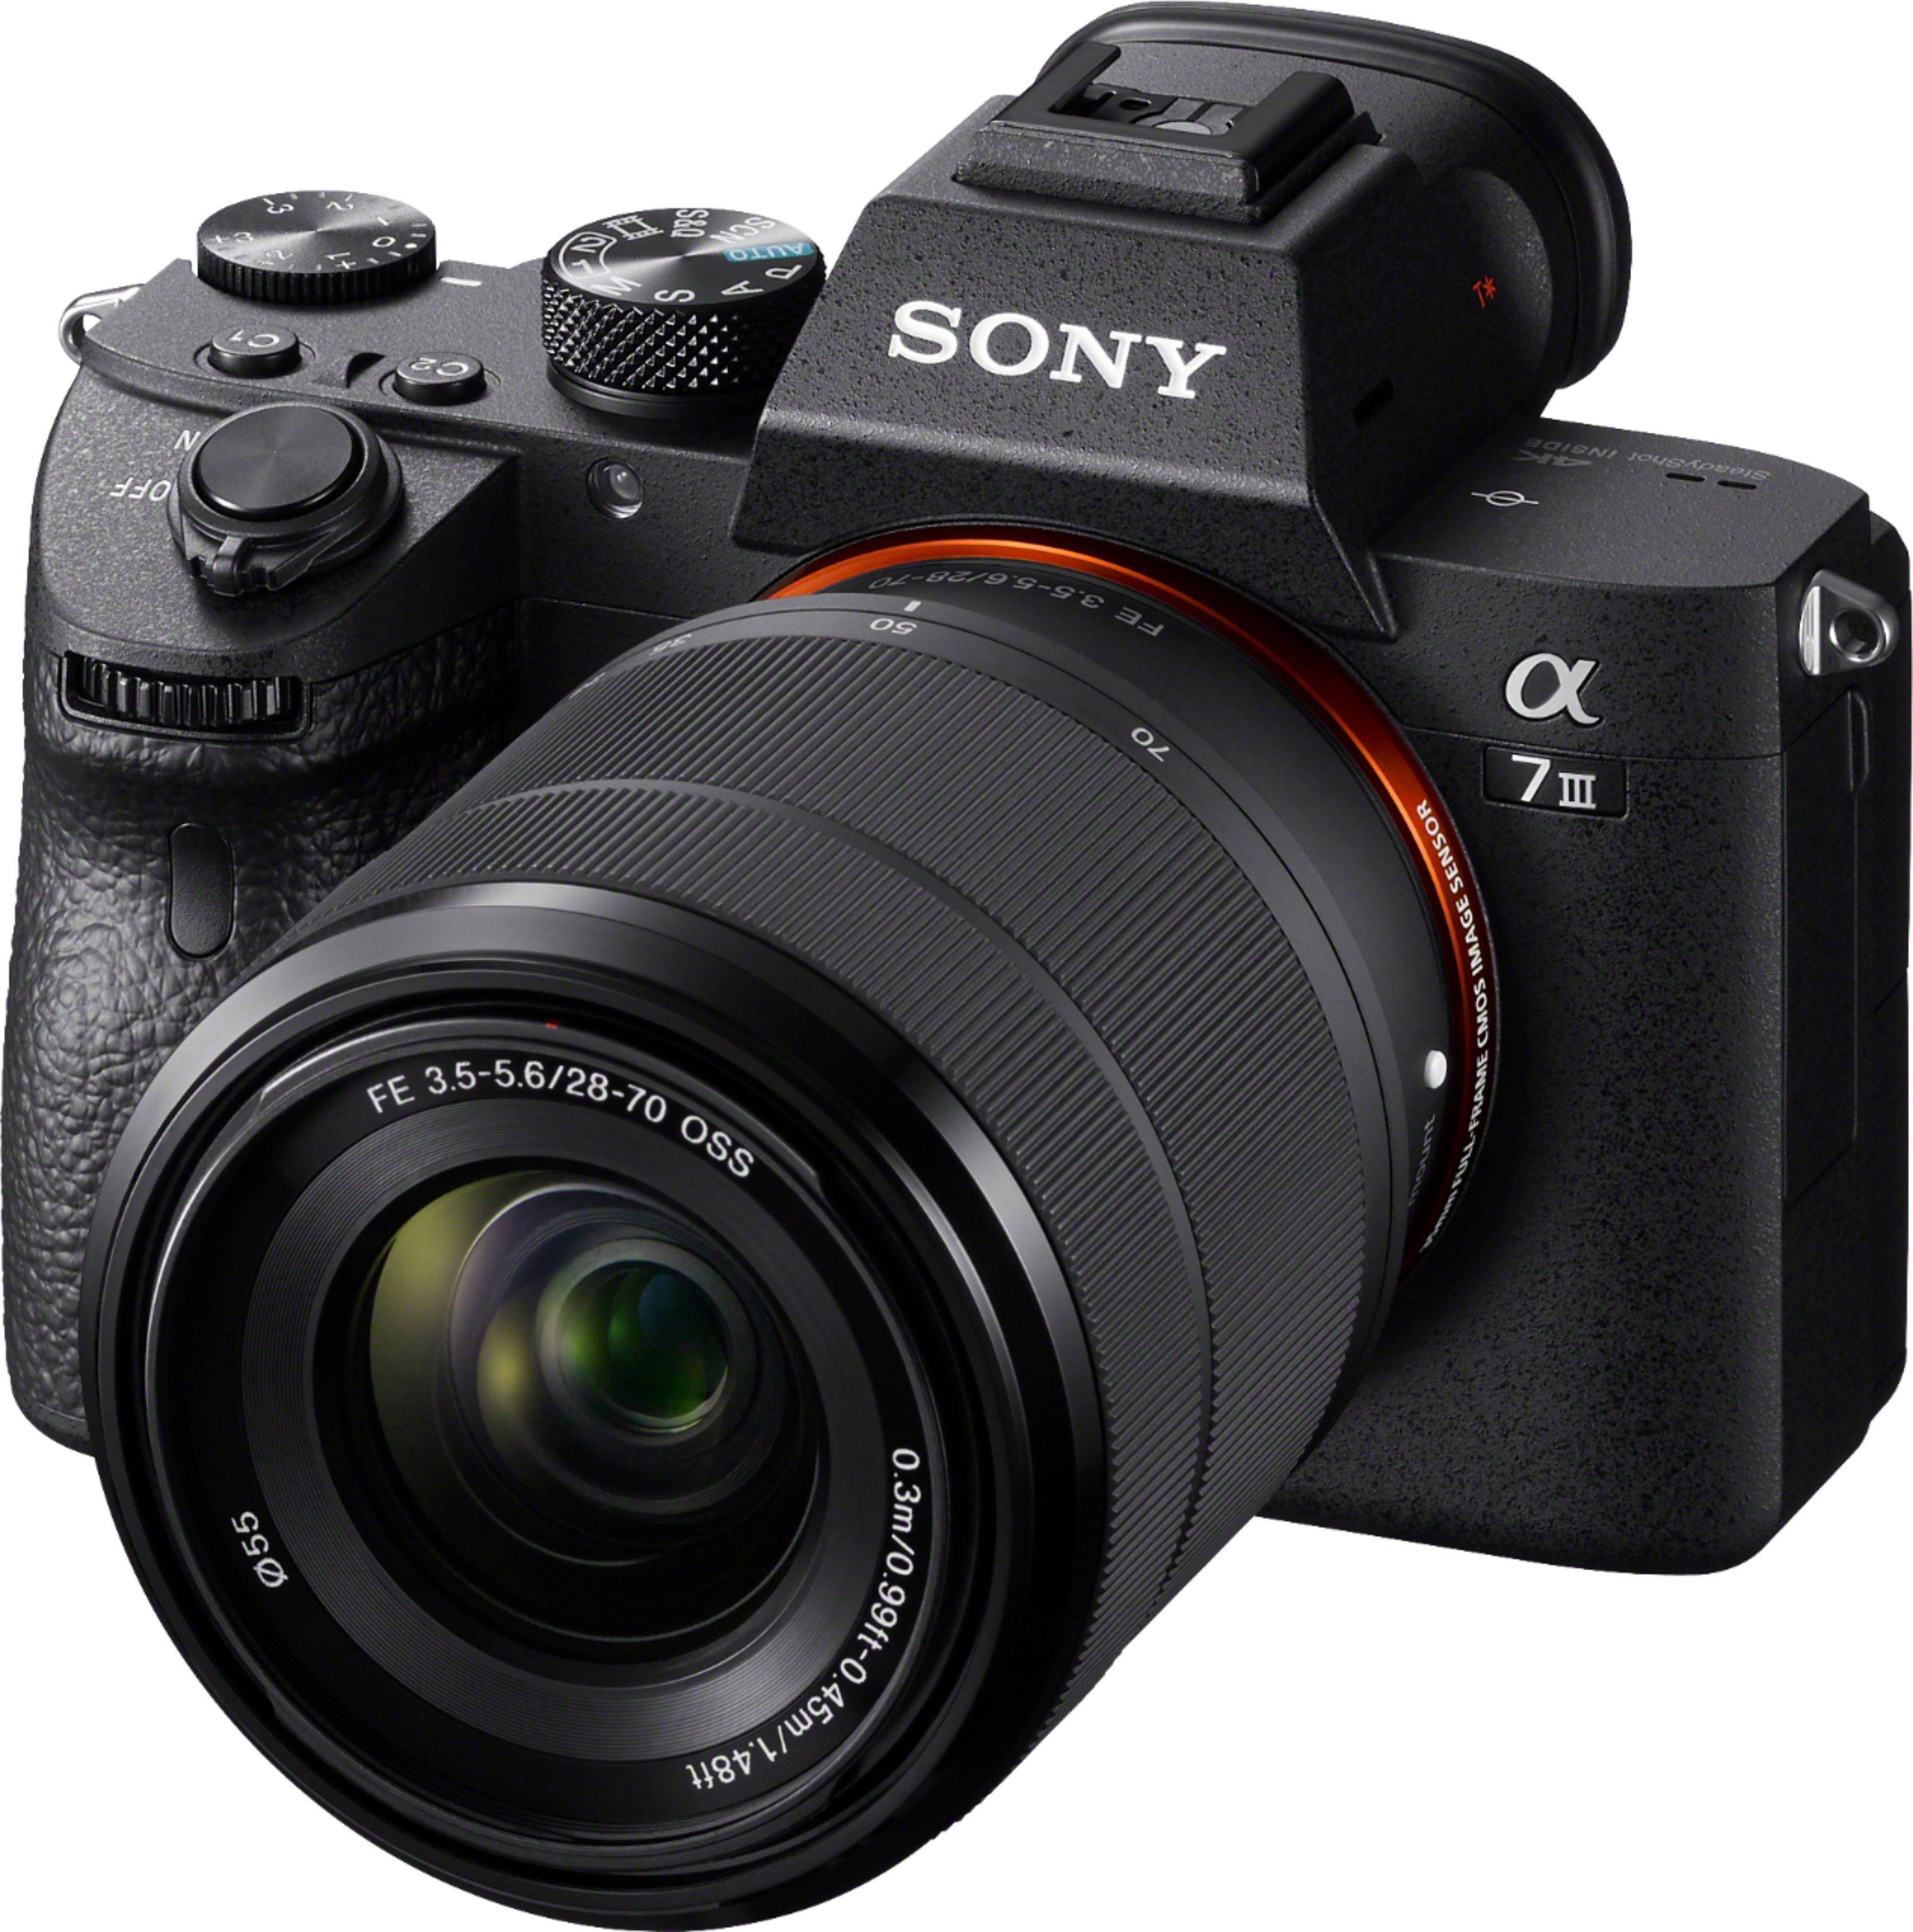 Sony Alpha a7 Mirrorless [Video] Camera with FE 28-70 mm F3.5-5.6 Lens Black ILCE7M3K/B - Best Buy